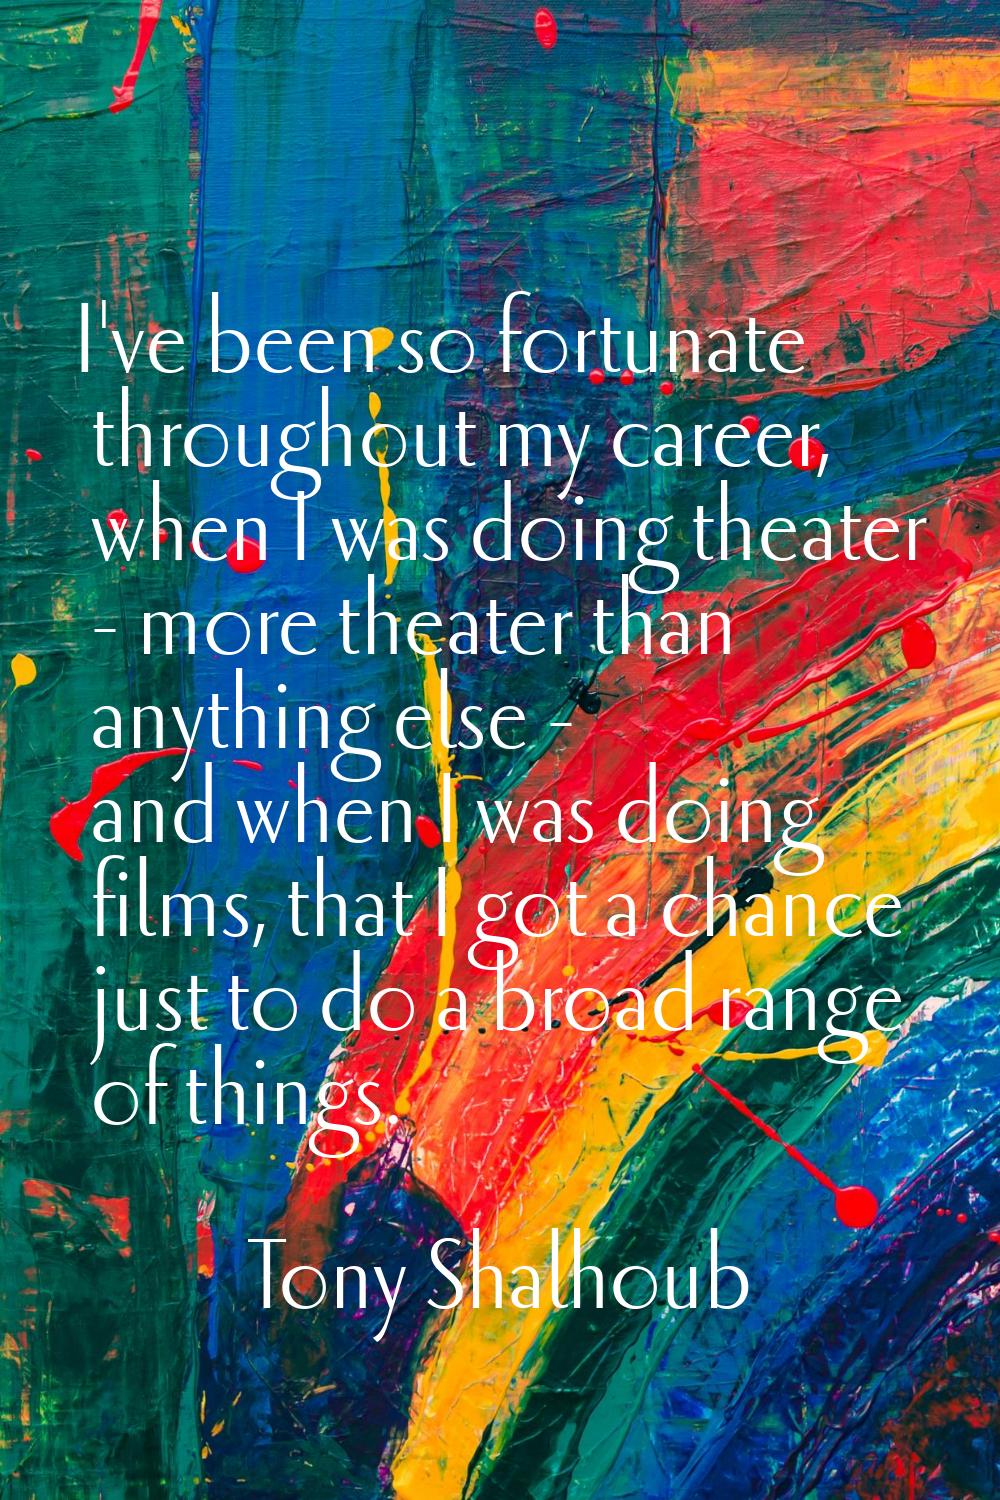 I've been so fortunate throughout my career, when I was doing theater - more theater than anything 